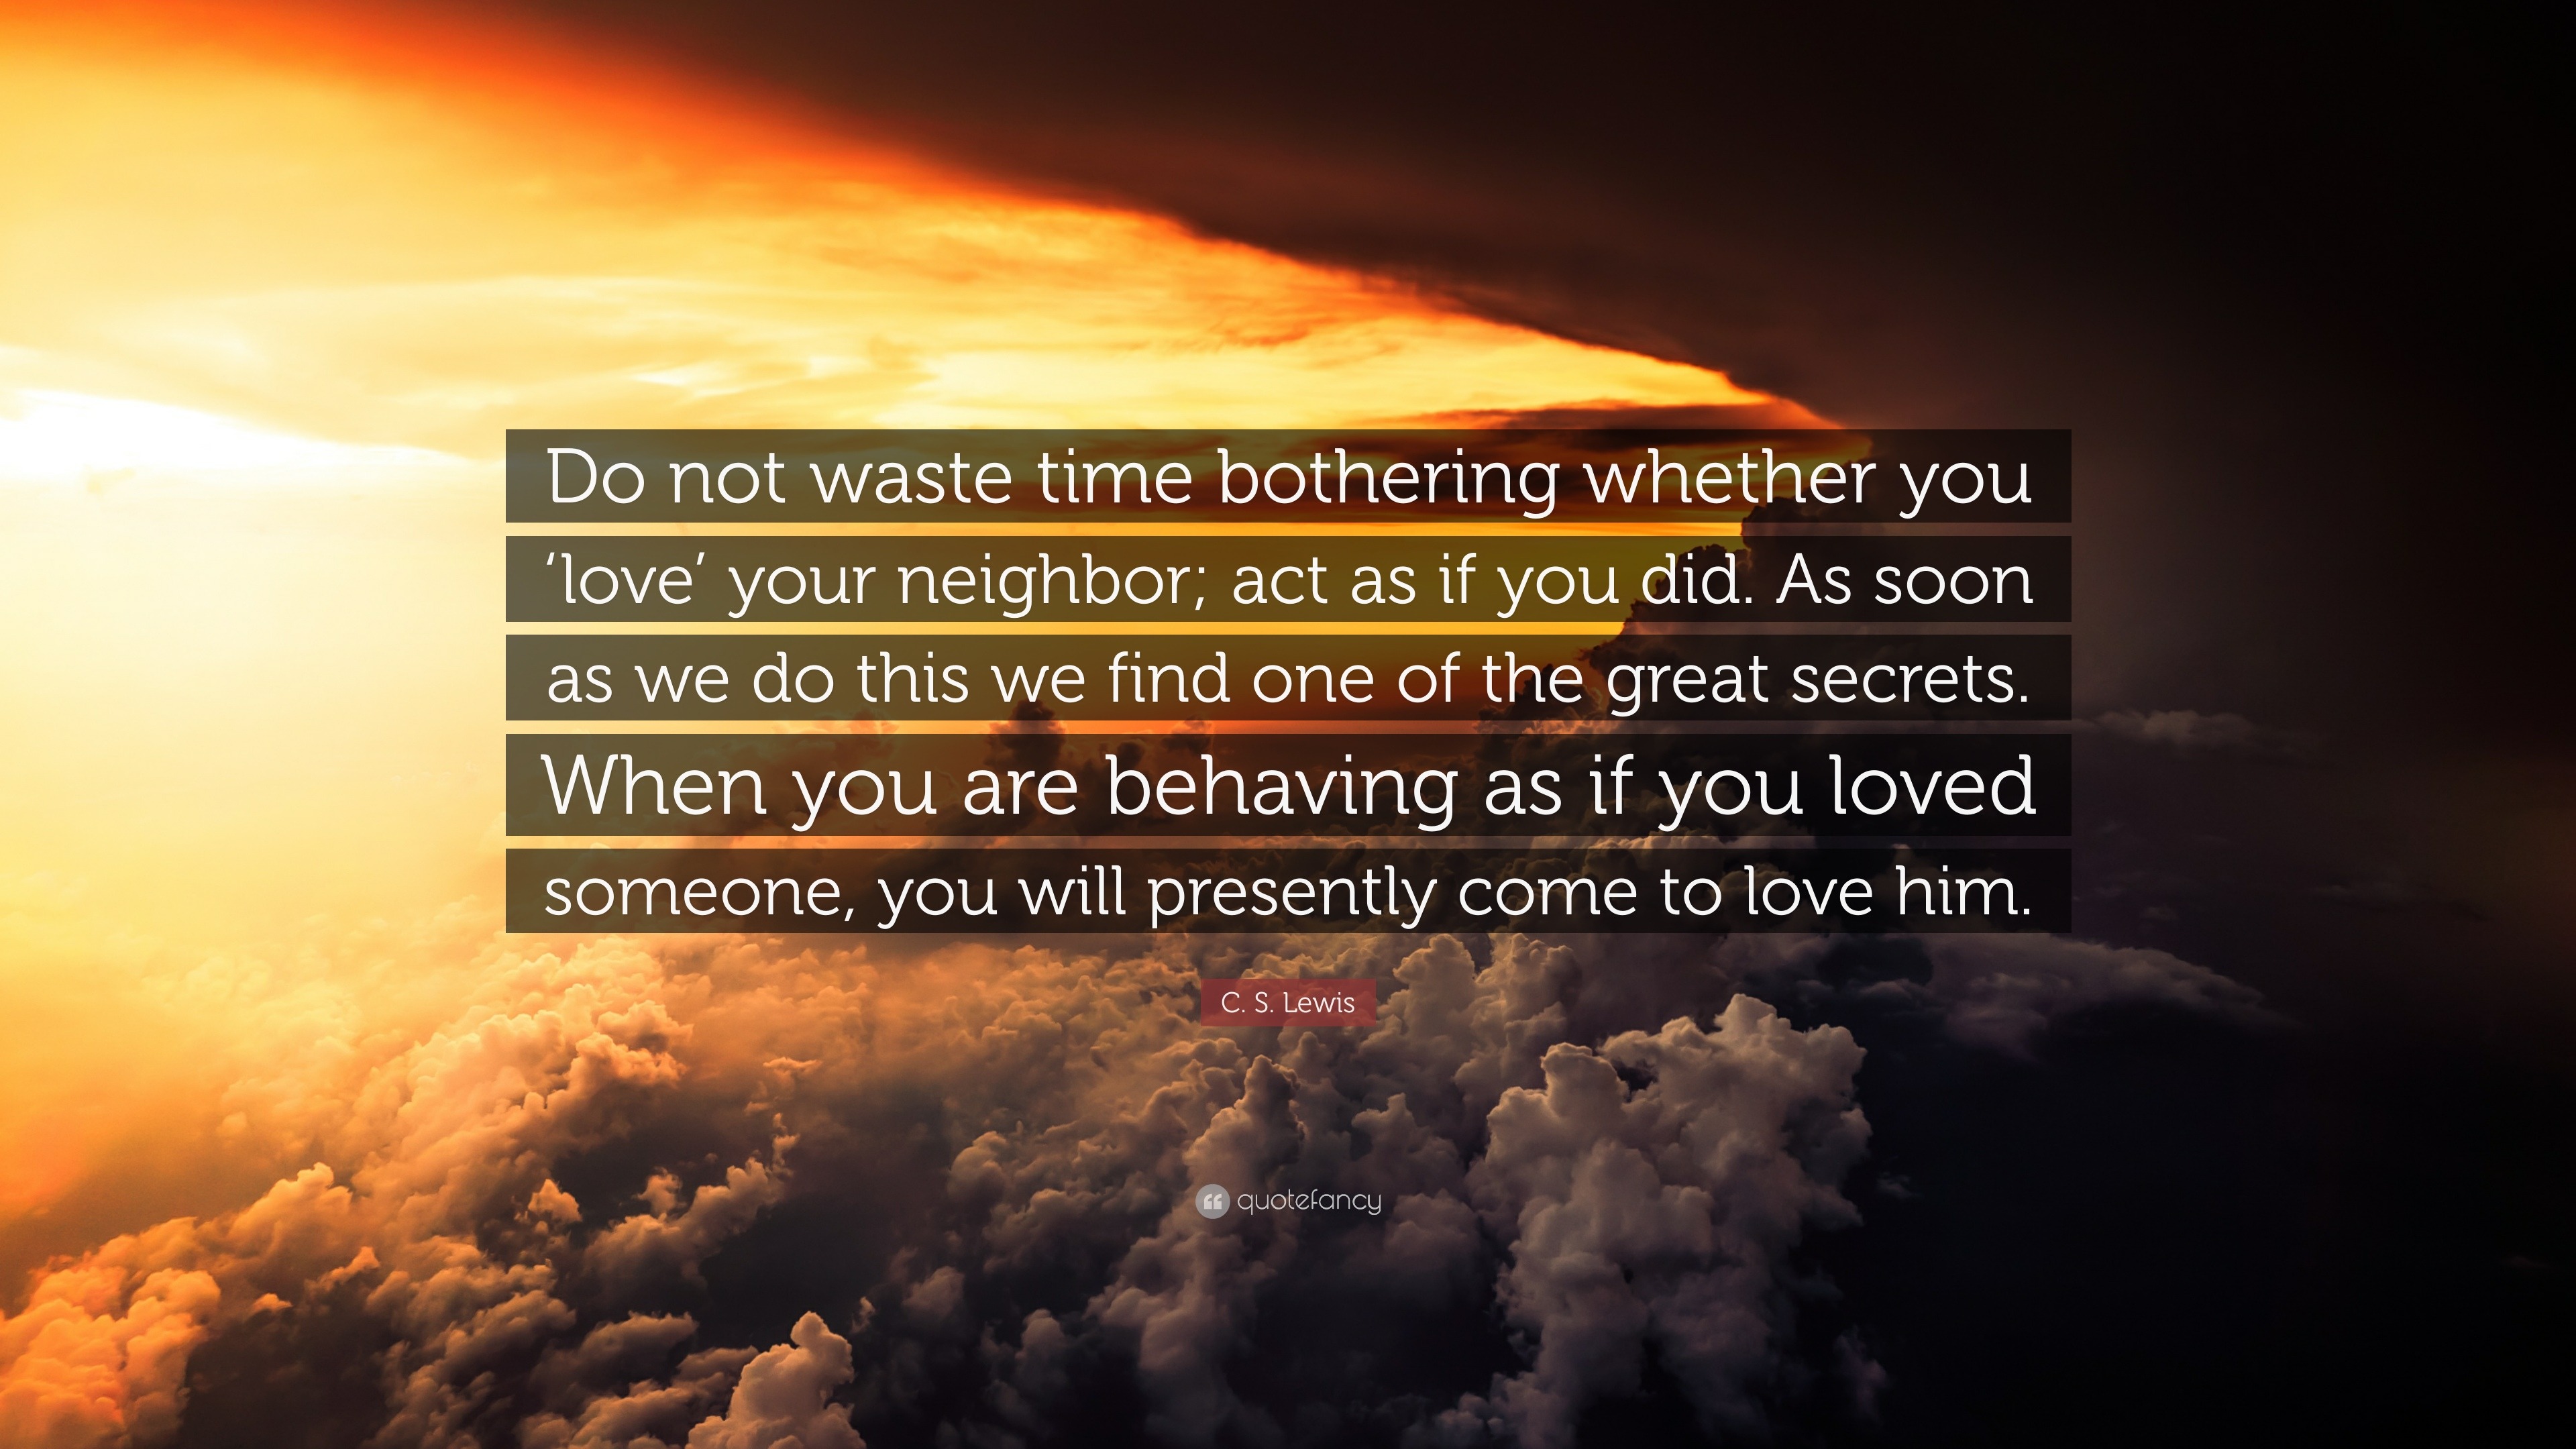 C S Lewis Quote “Do not waste time bothering whether you love your